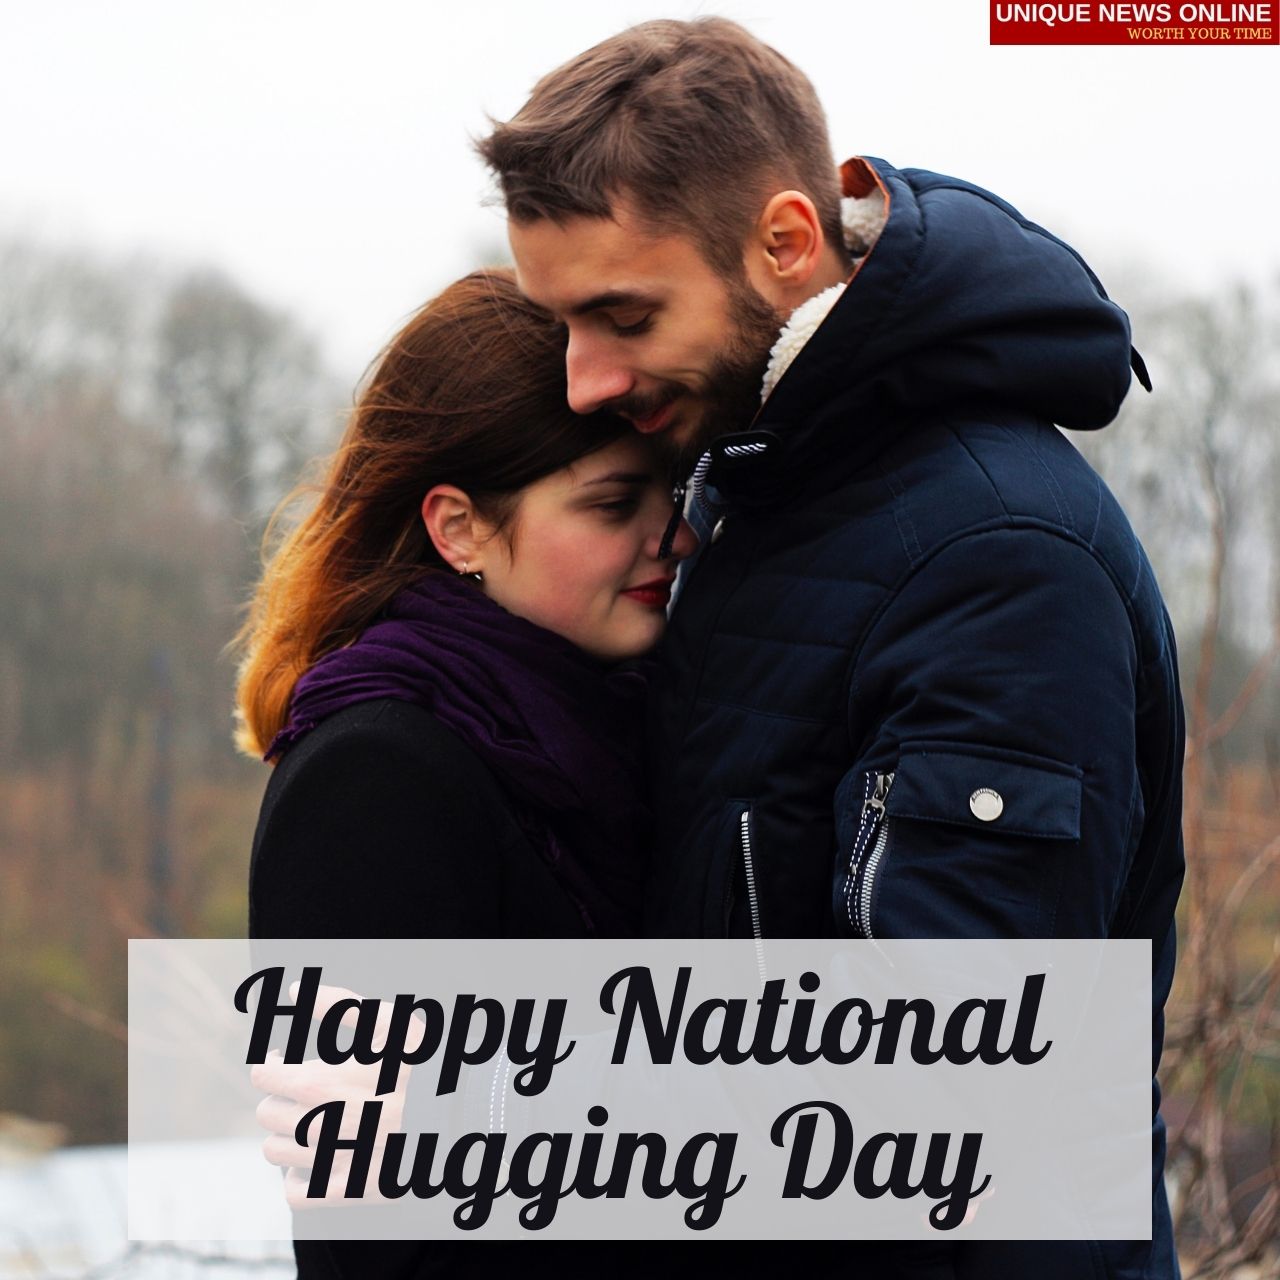 Happy National Hugging Day 2022: Wishes, Quotes, HD Images, Cliparts, Memes to share